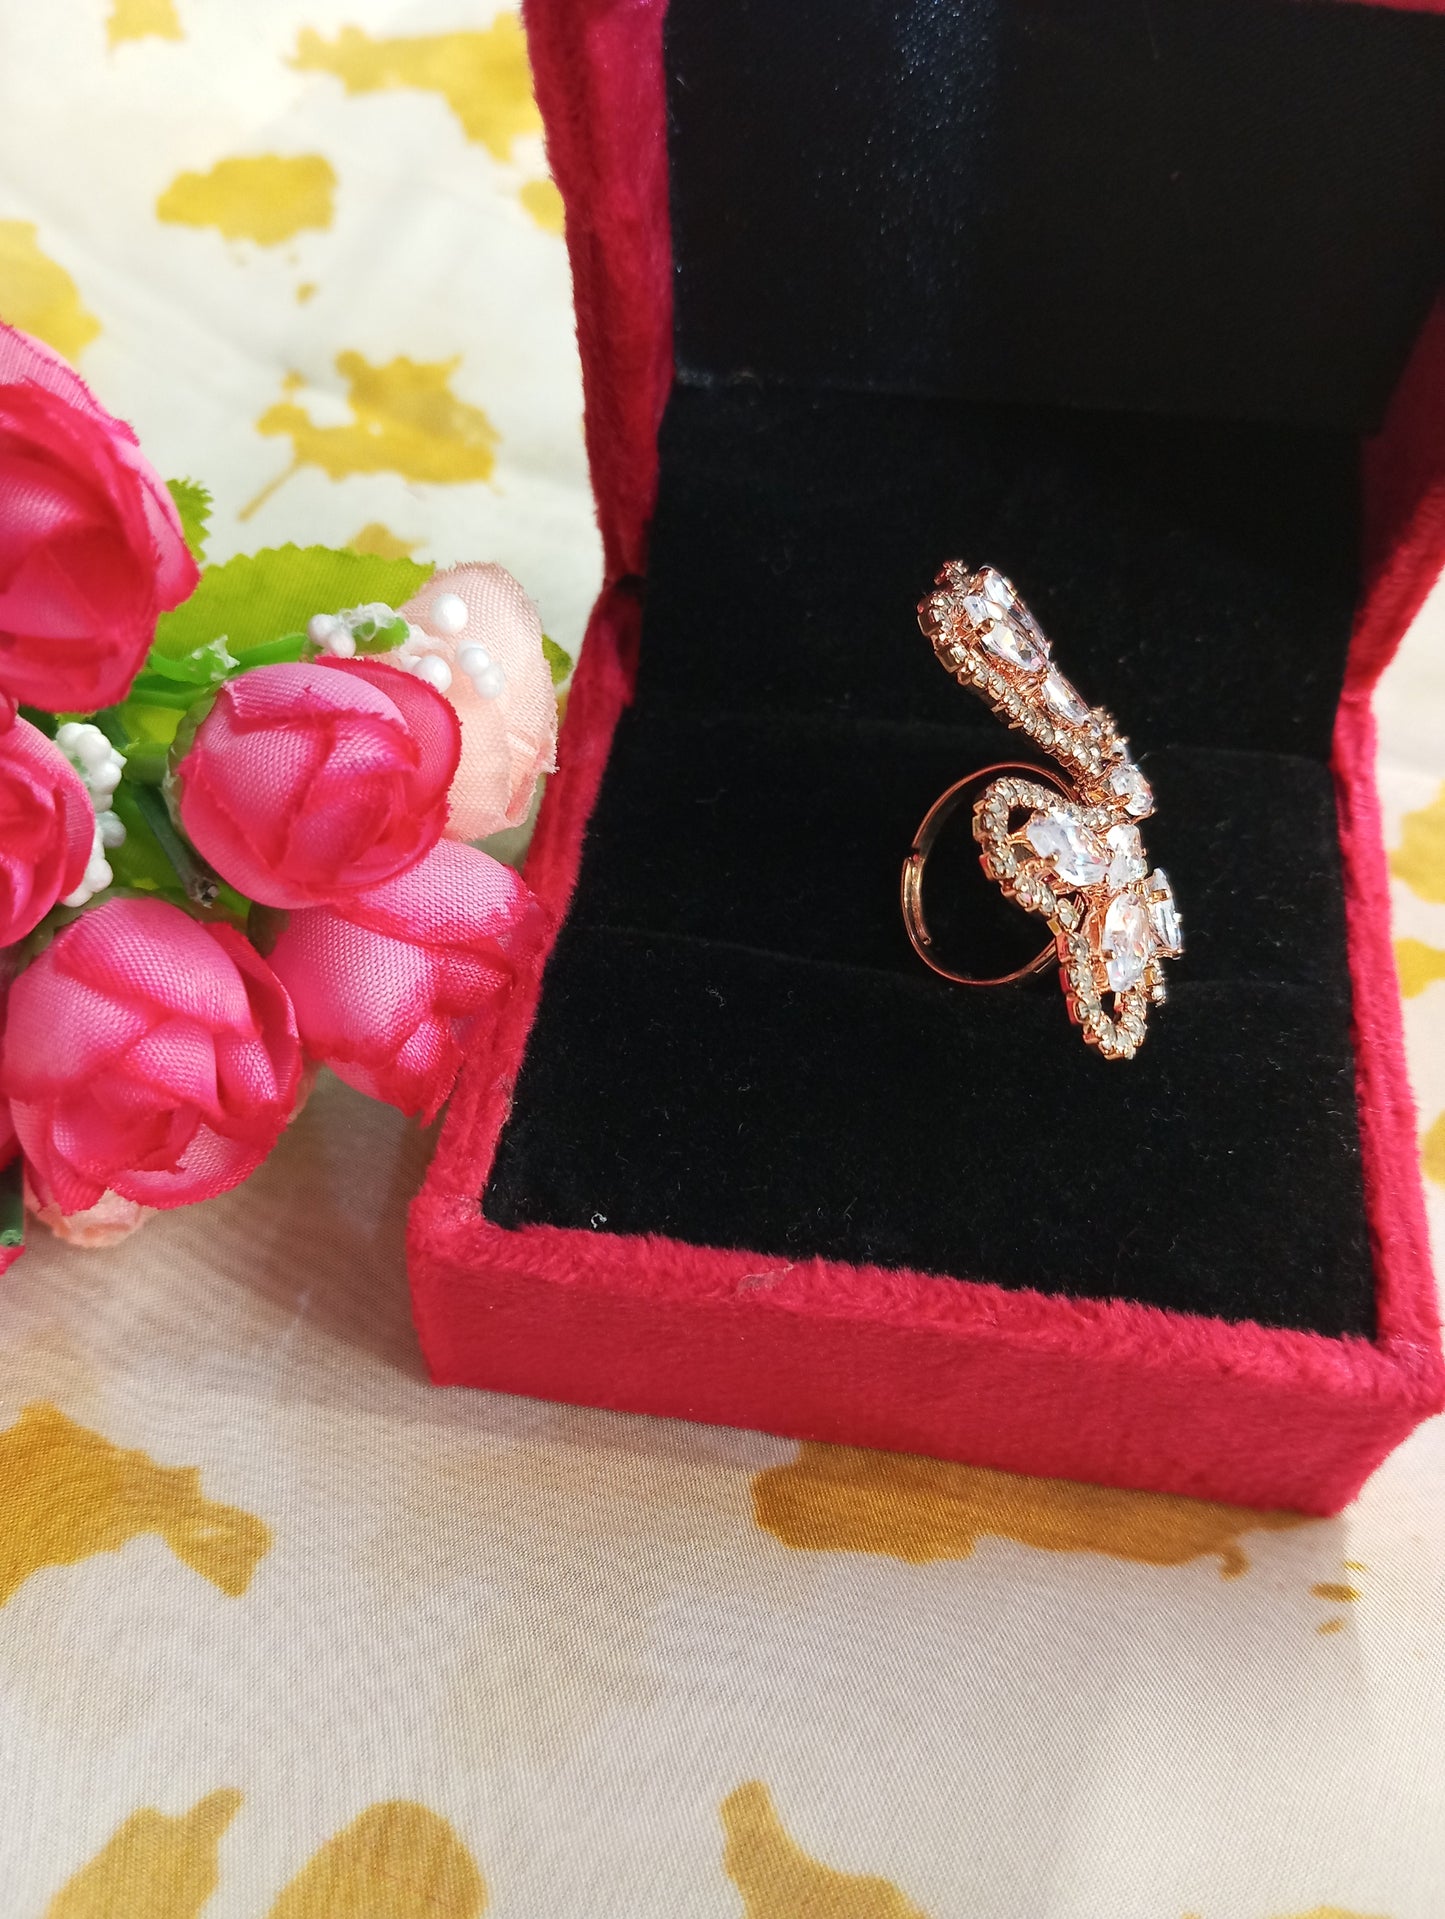 Adjustable CZ studded Rose Gold Butterfly Ring